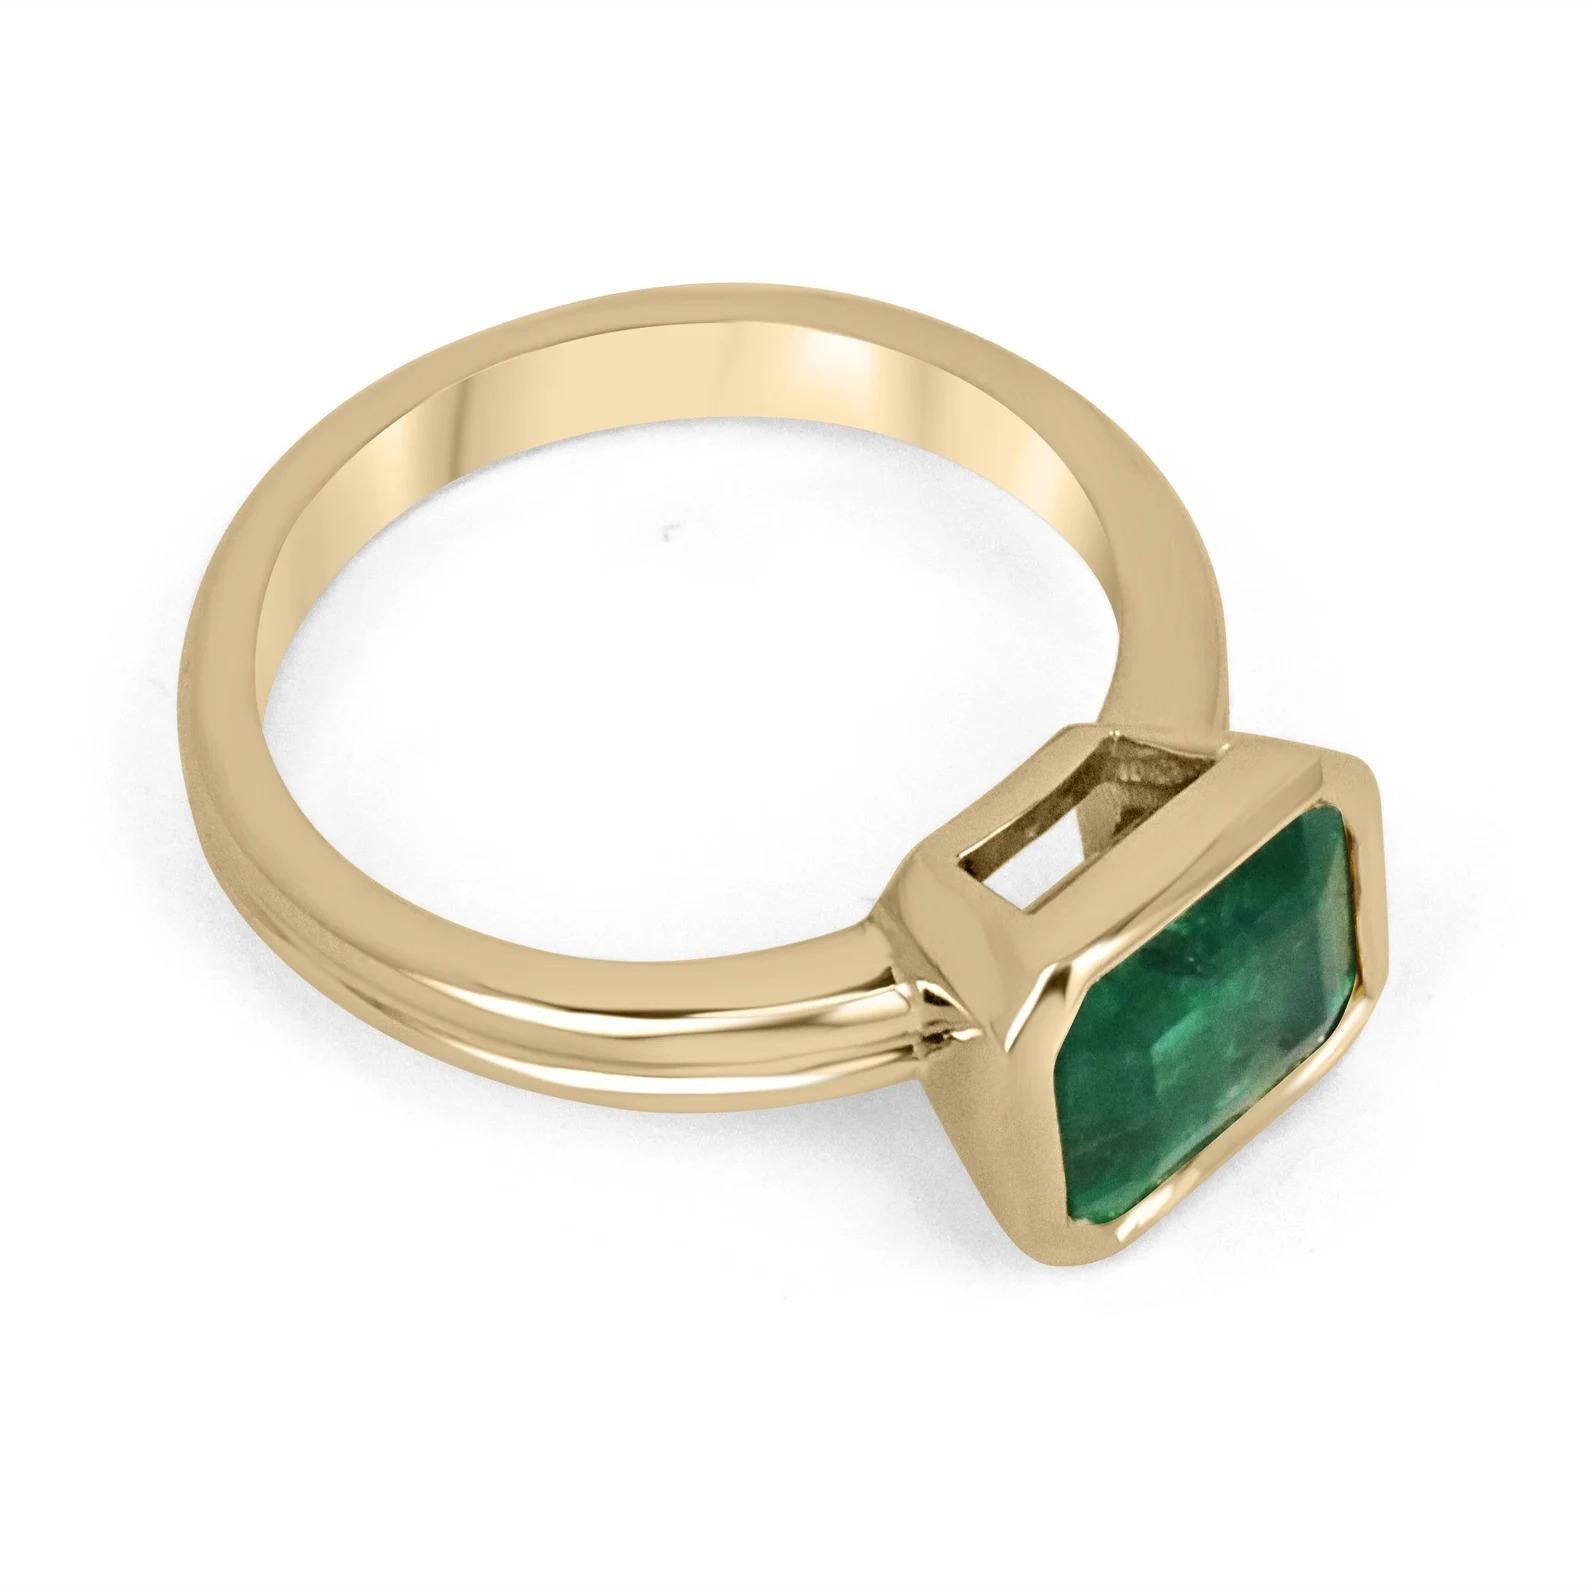 Displayed is a stunning East-to-West emerald solitaire engagement or right-hand ring in 14K yellow gold. This gorgeous solitaire ring carries a 2.75-carat emerald in a bezel setting. Fully faceted, this gemstone showcases excellent shine and